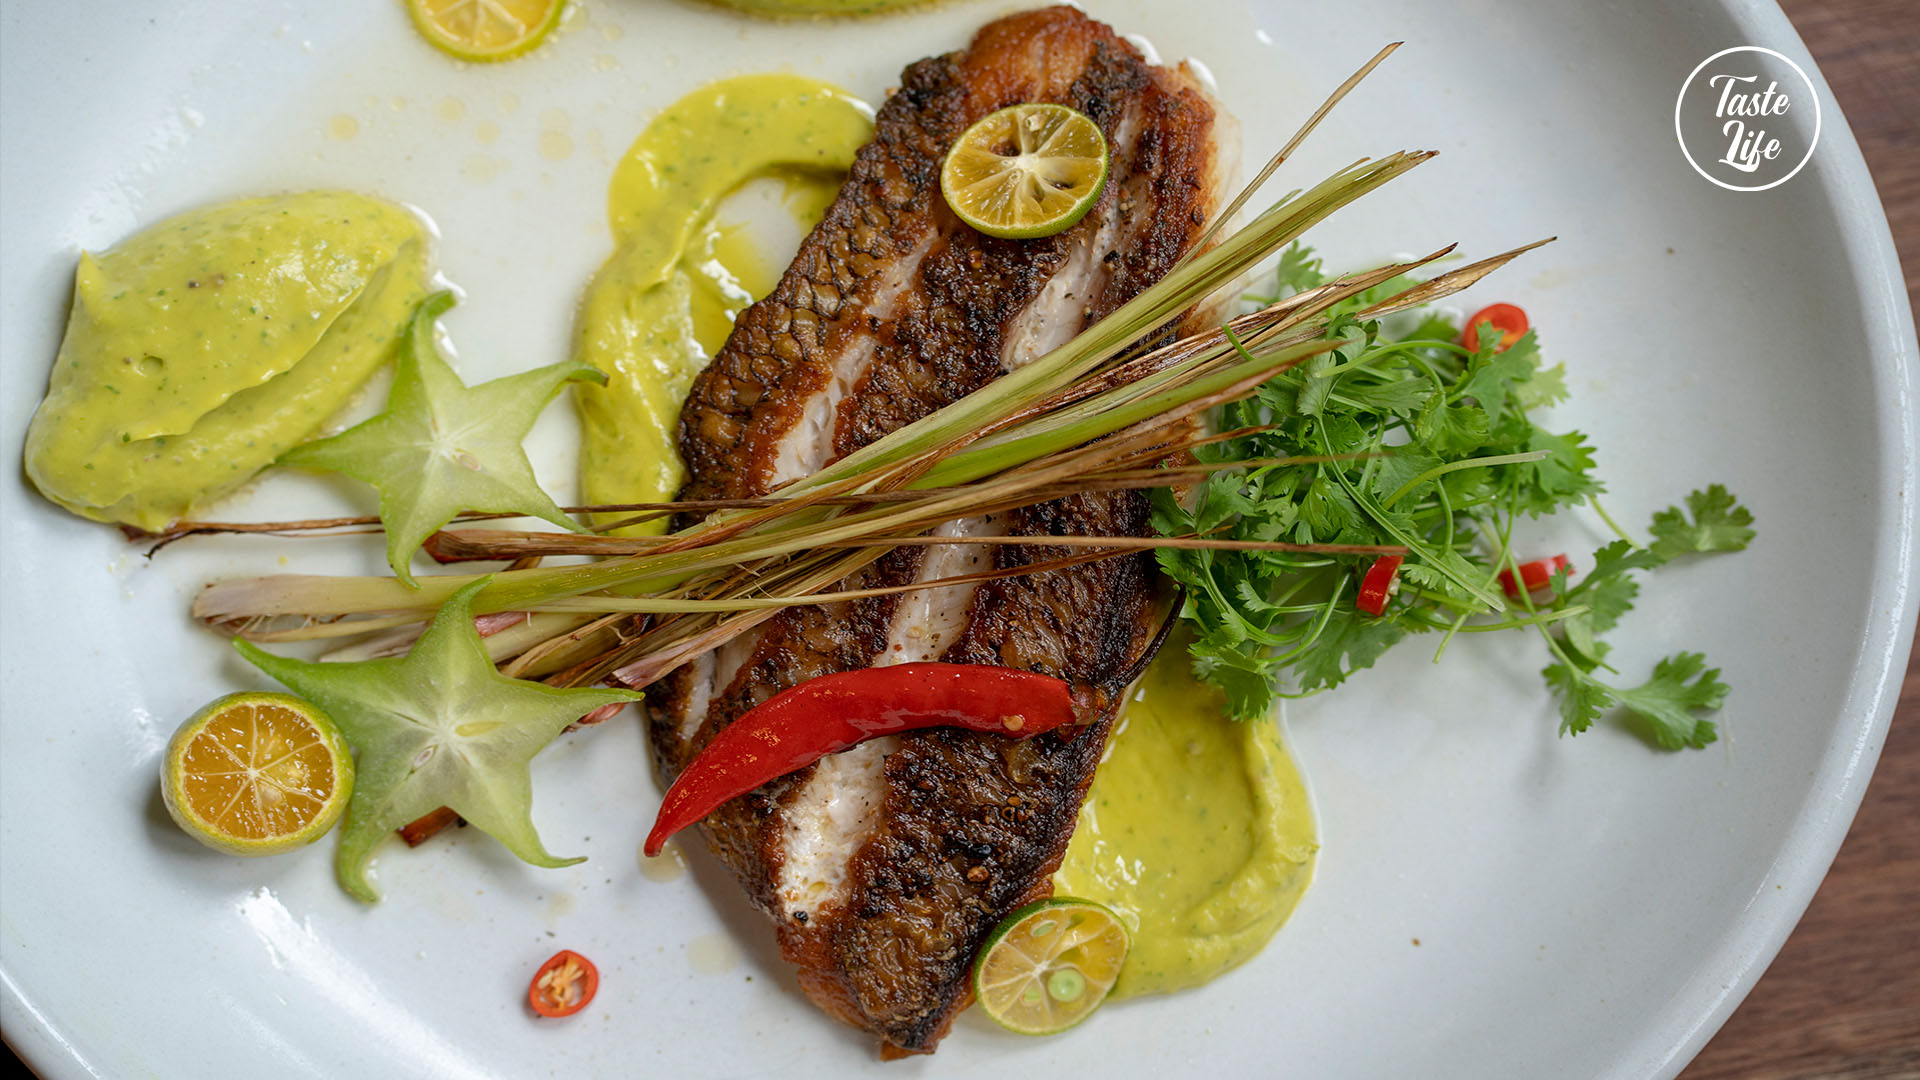 Pan-fried fish fillets with nicoise salad